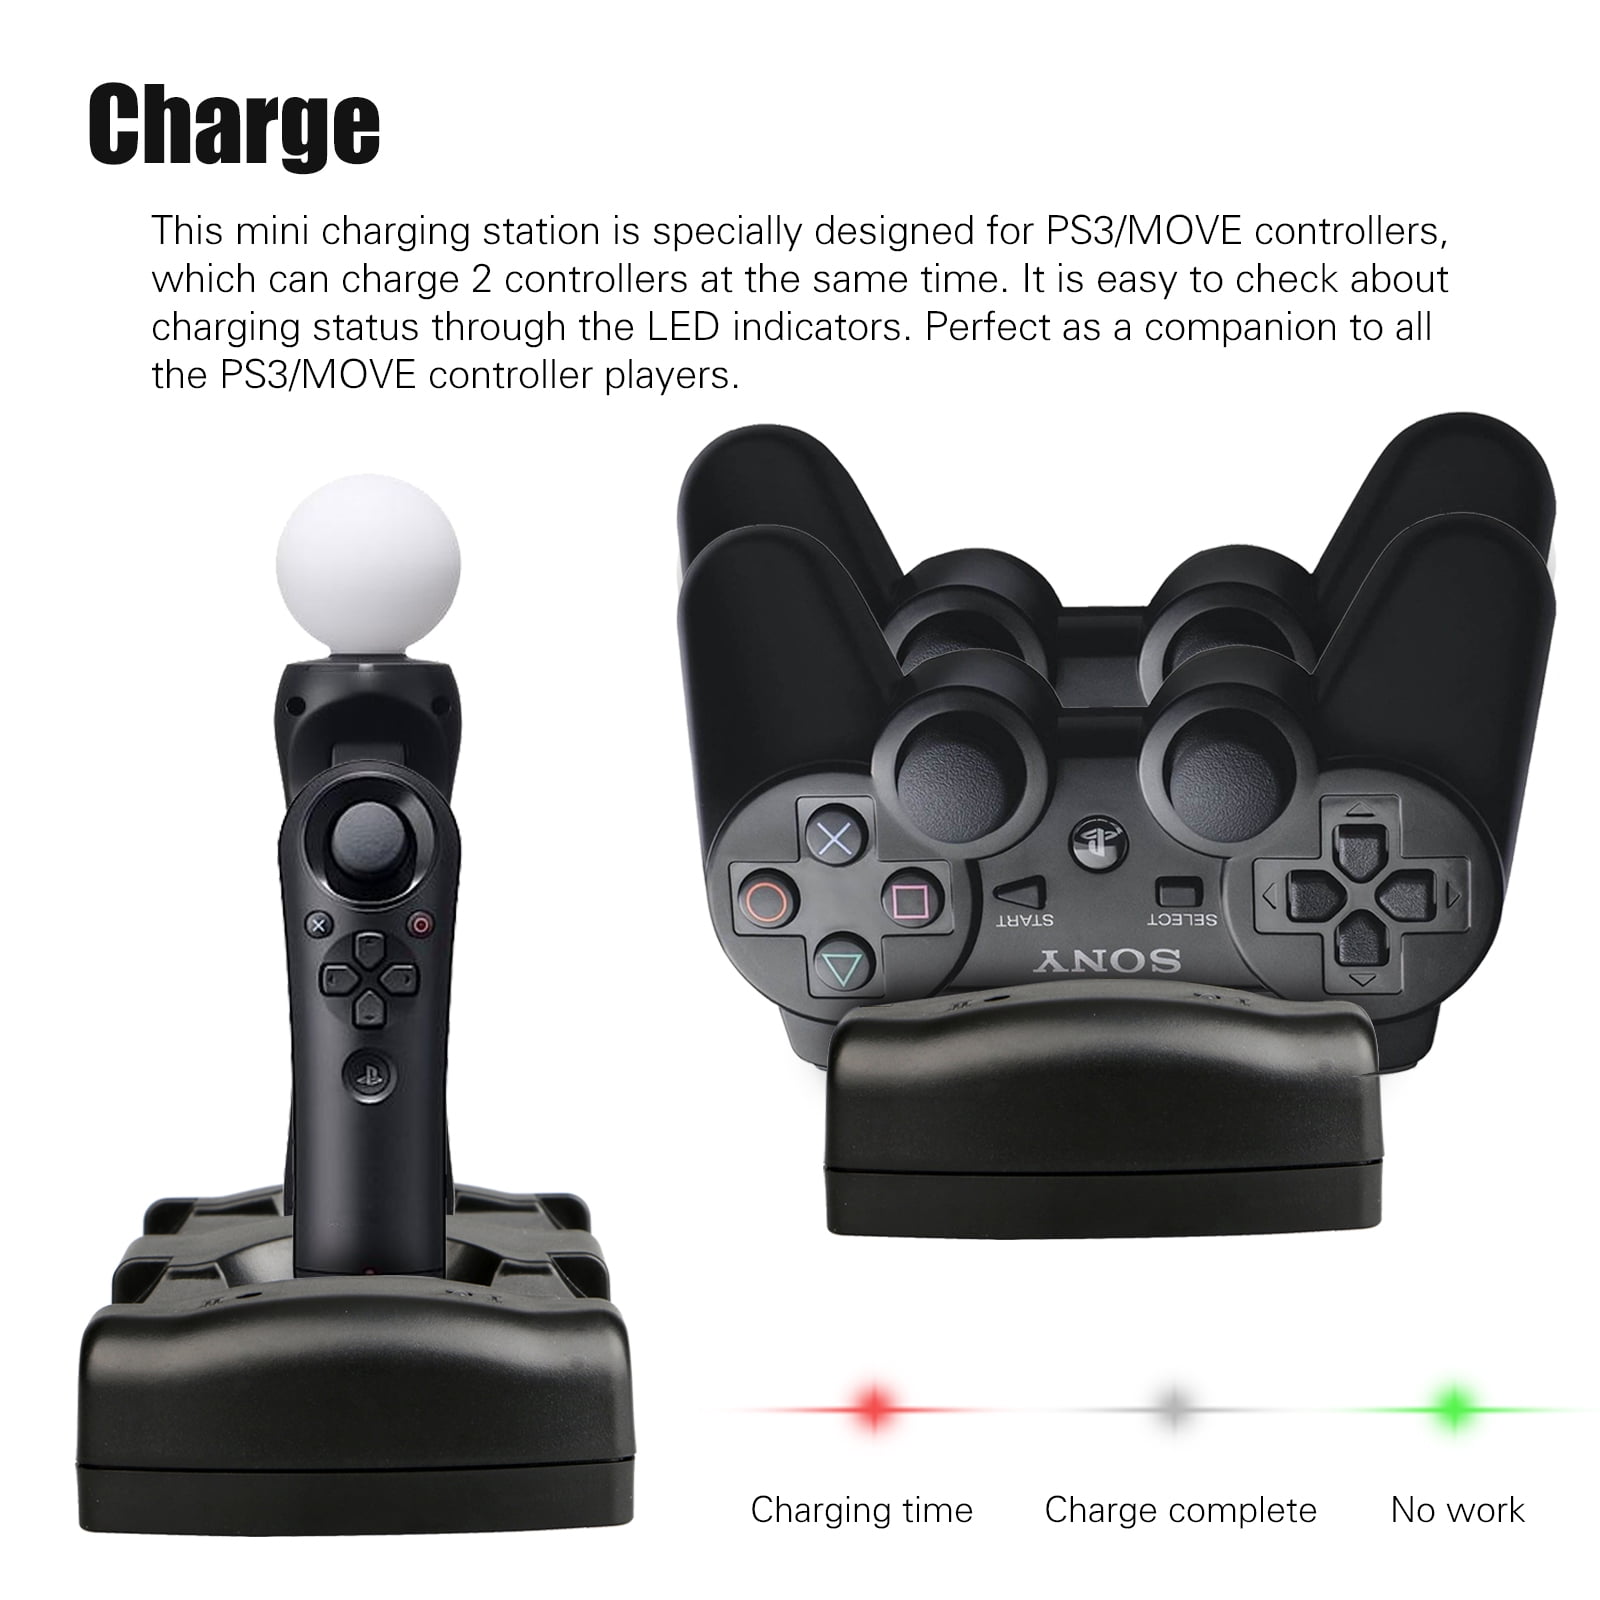 Charging Dock Fit Sony Playstation 3 PS3 MOVE Controller, TSV Charging Dock Station for PS3 with USB Cable, Controller Charging Dock Stand Accessory for Dual Slot Charger, - Walmart.com